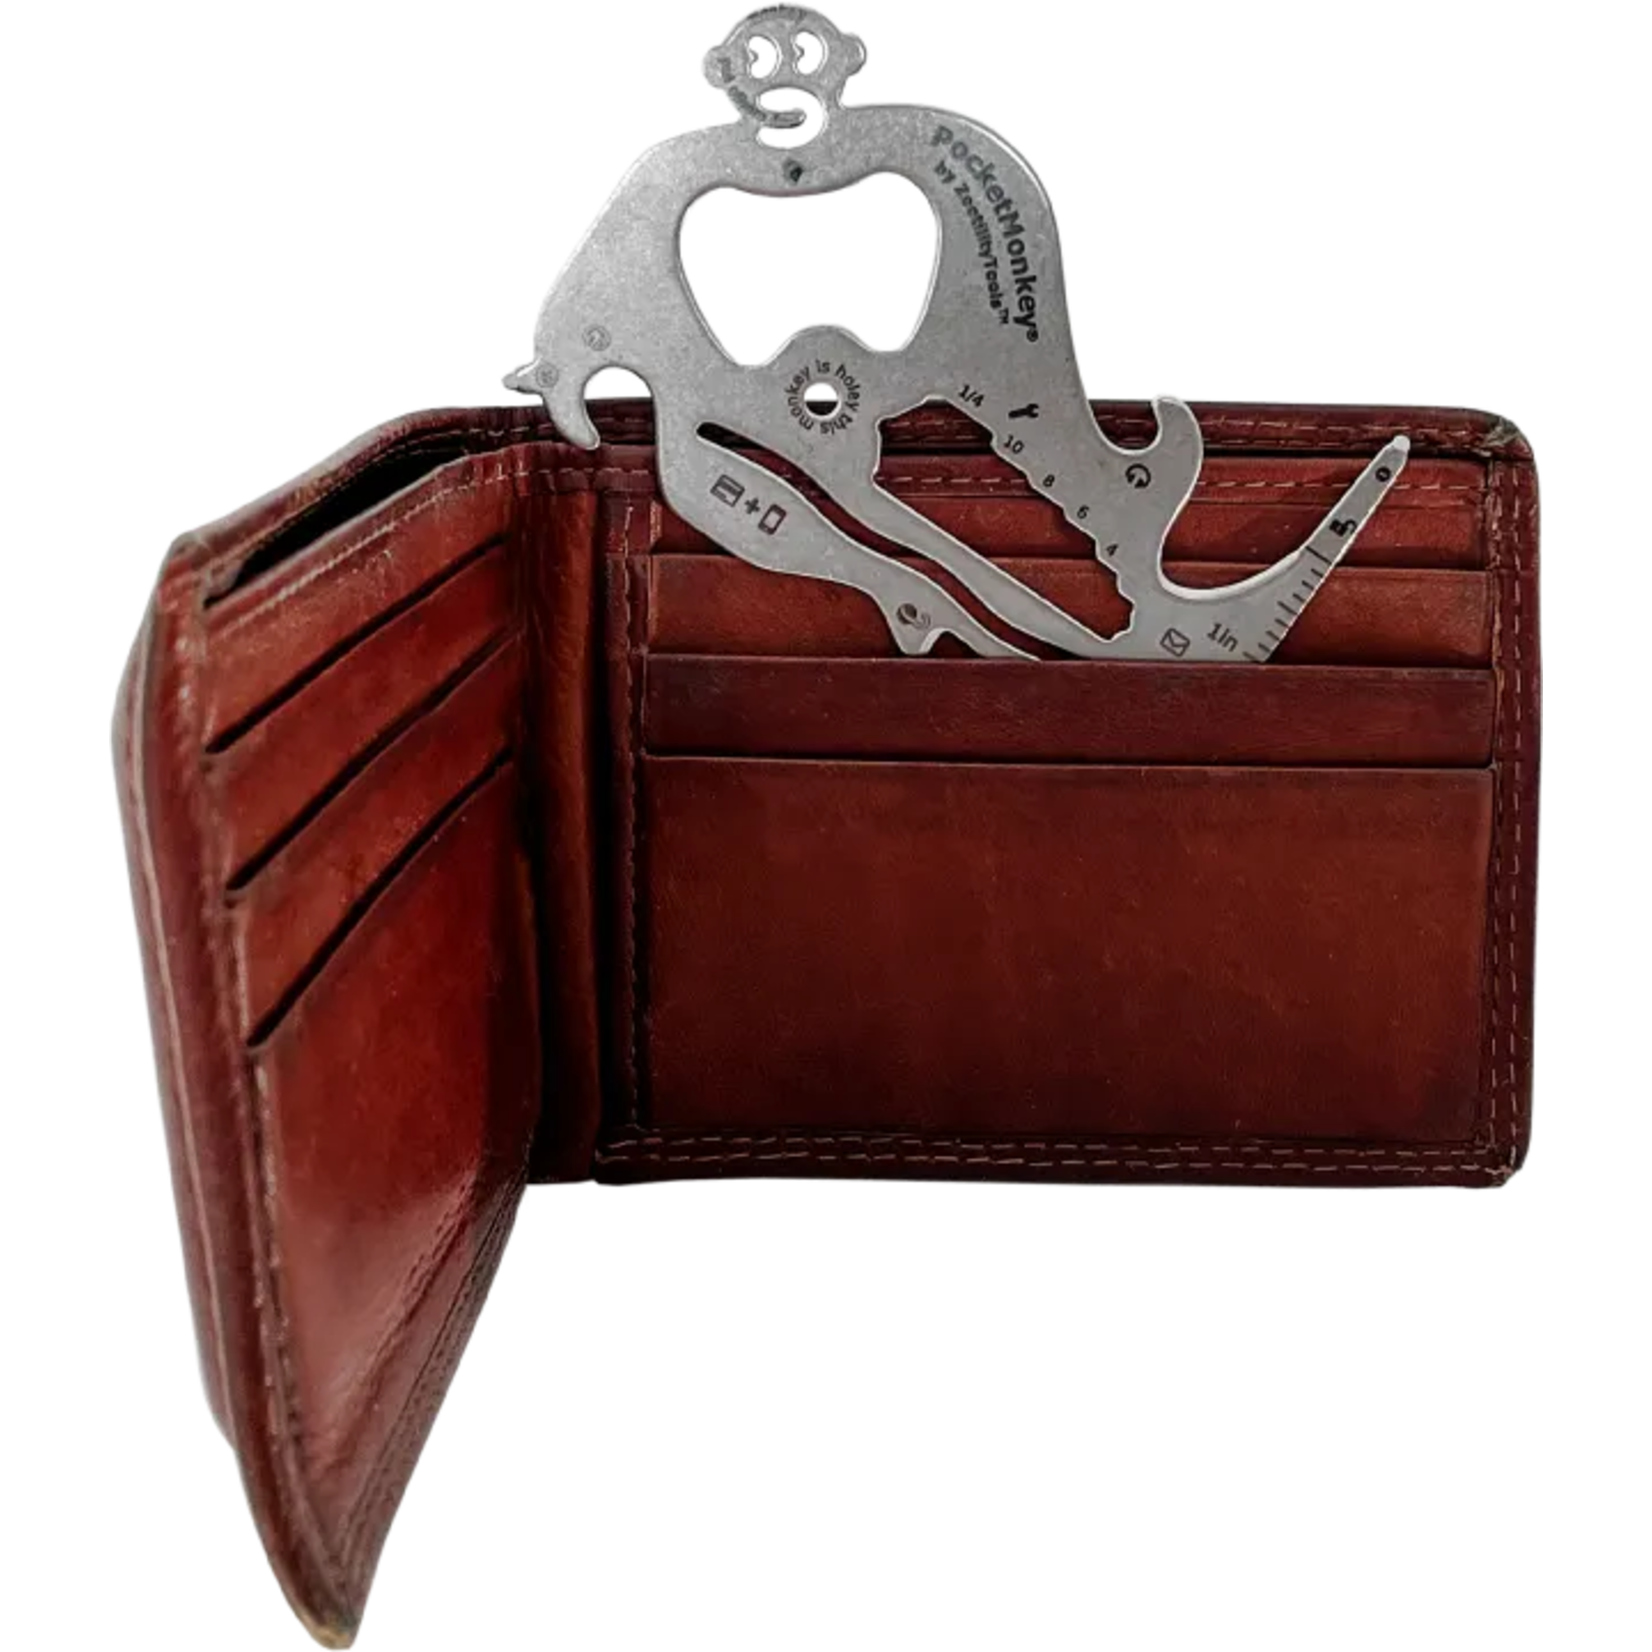 Zootility PocketMonkey Multi-Tool Wallet Card - DISCONTINUED